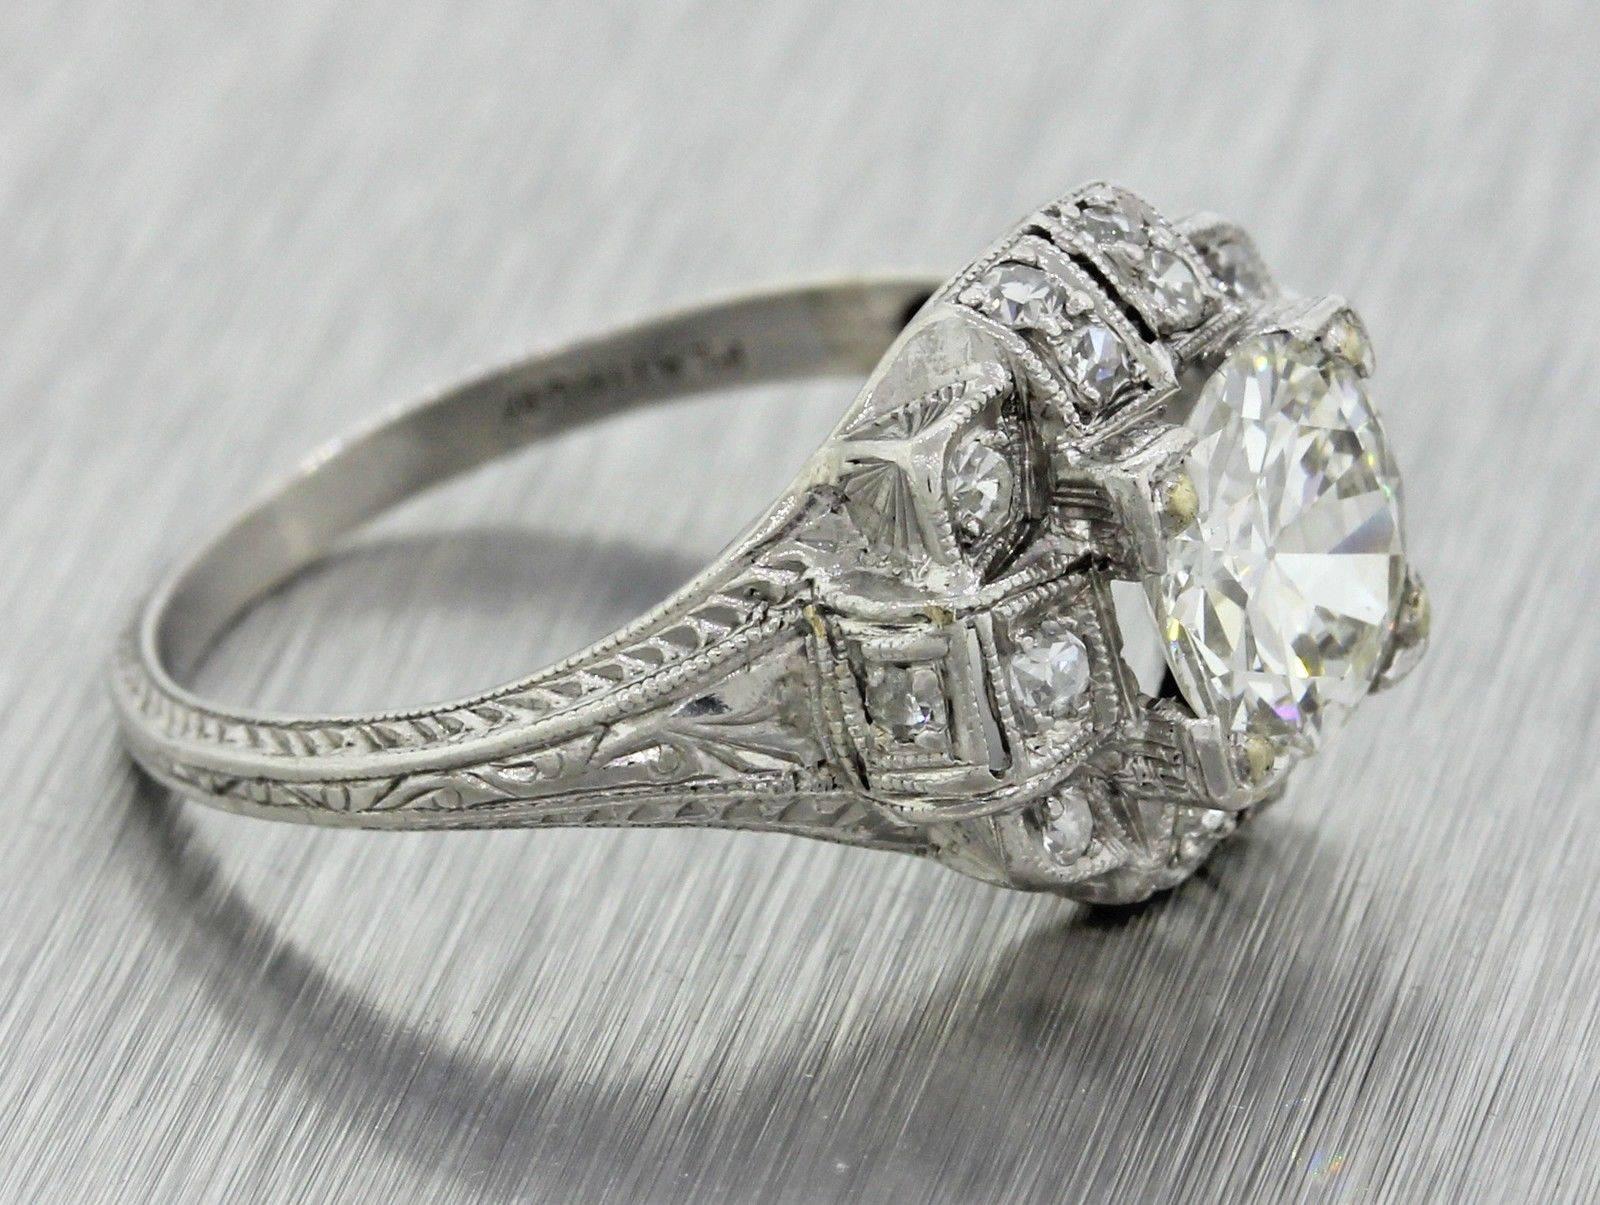 This is another exquisite stunning antique art deco platinum diamond engagement ring that can dated back to the 1920's. This ring's suggested retail price is $16,220.00 USD and was determined by UGS an independent appraisal company. This engagement